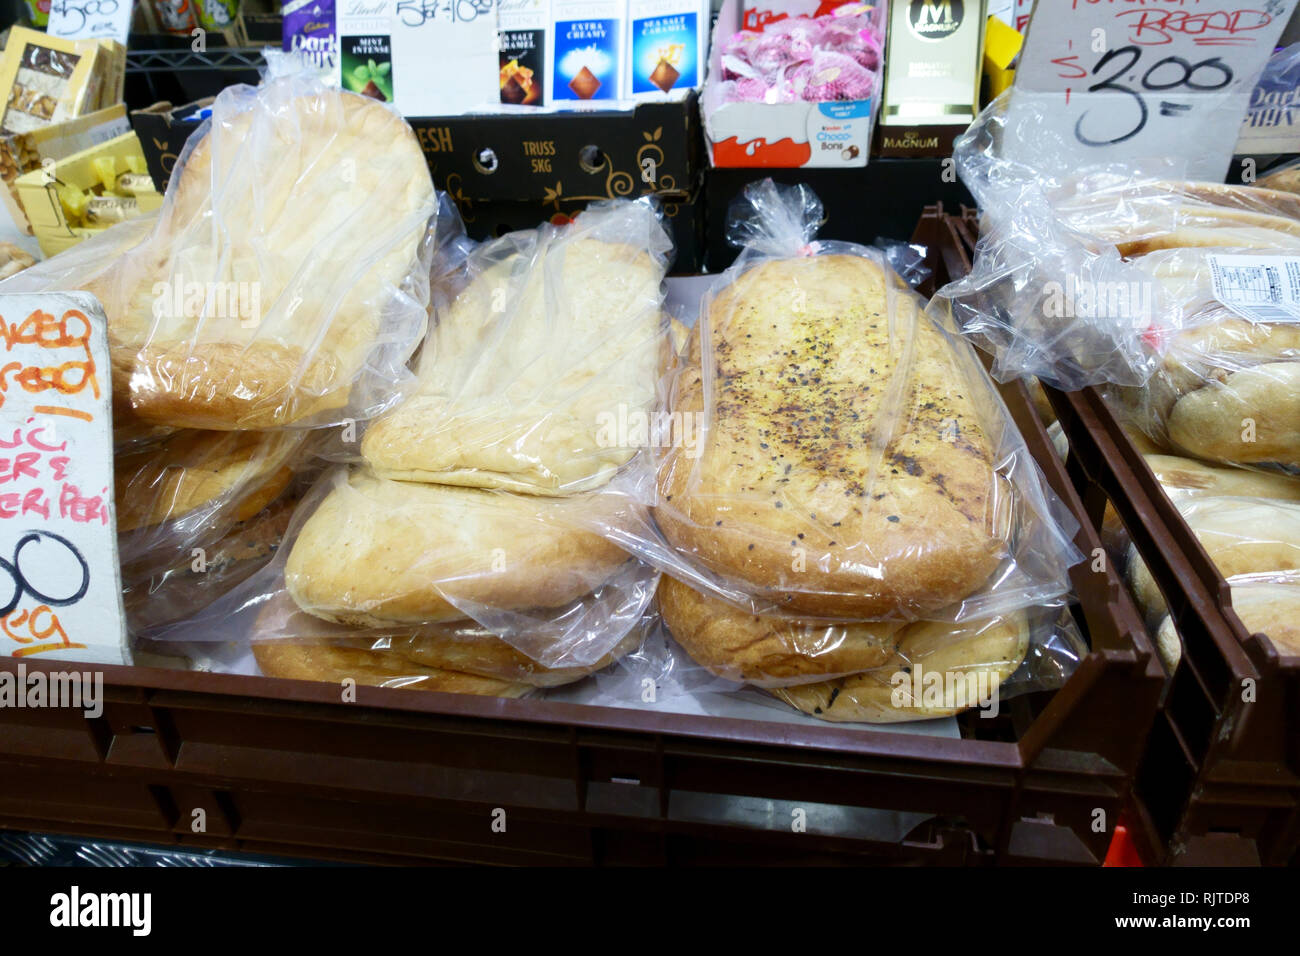 Middle Eastern bread being sold at Victoria Market Melbourne Victoria Australia Stock Photo